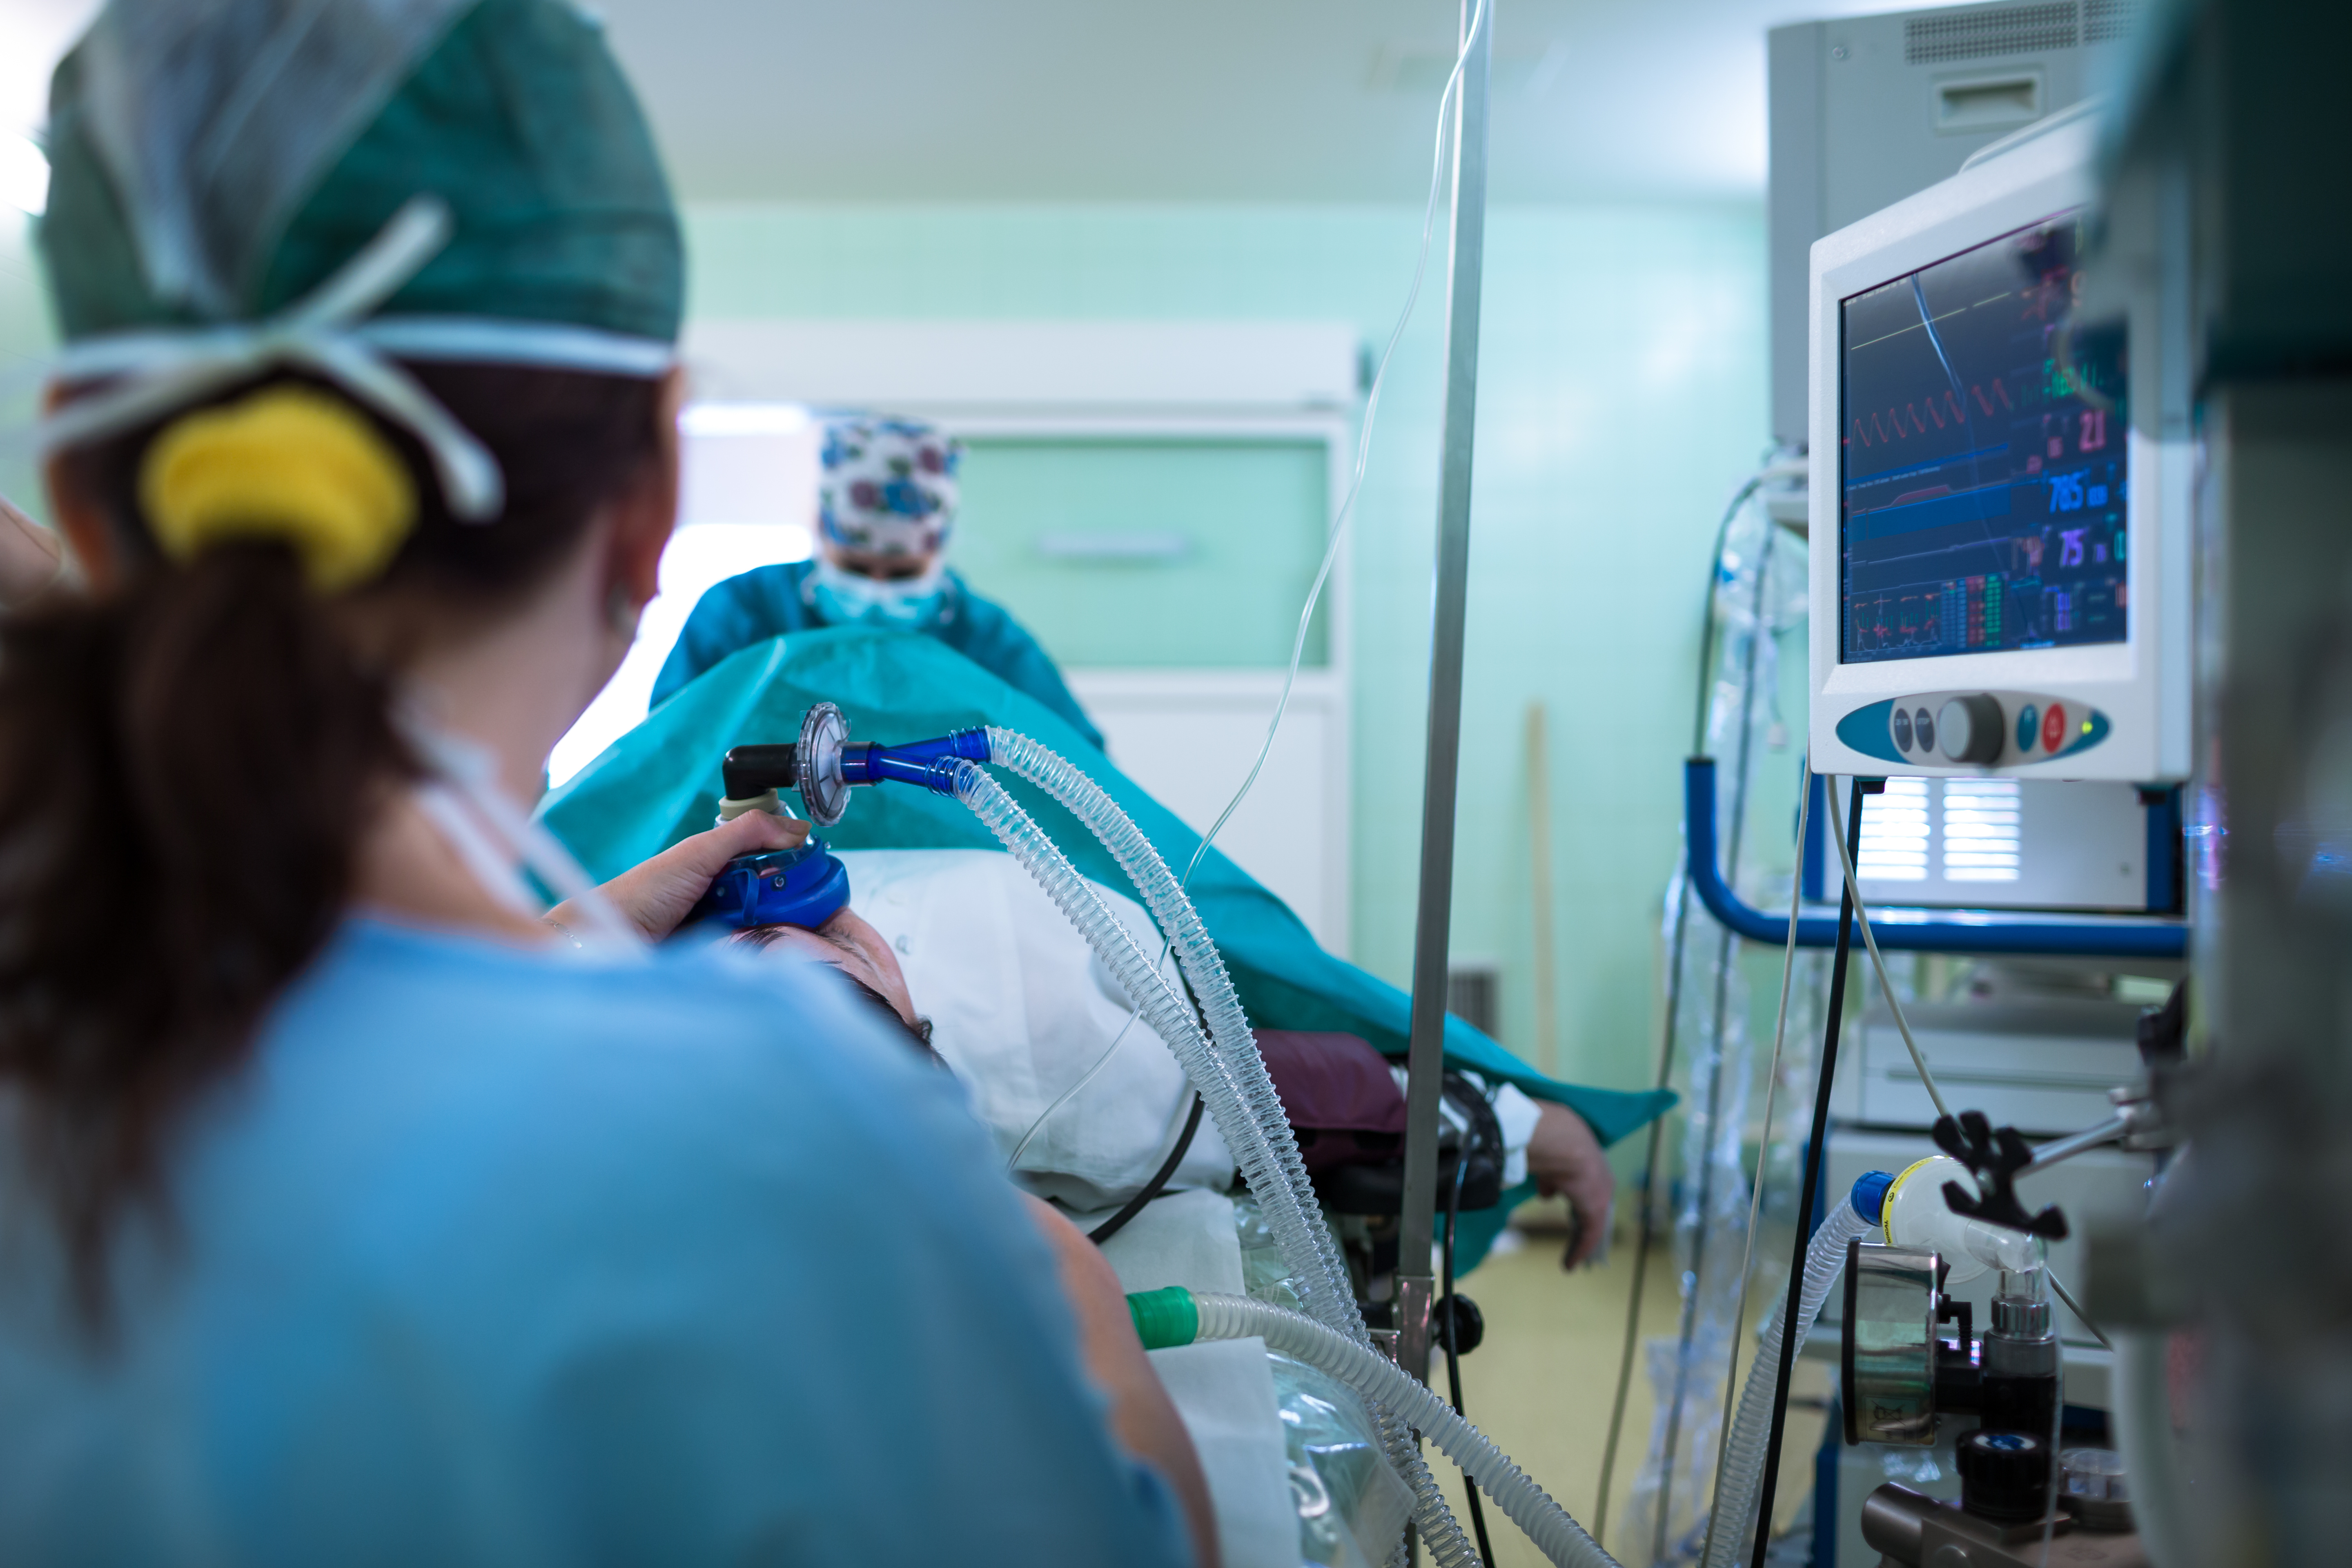 An operating room scene shows a patient on a table. Our perspective is from behind the anesthesiologist who holds a mask on the patient's face and watches a monitor with a bunch of indicators. A surgeon stands out of focus on the far end of the patient.